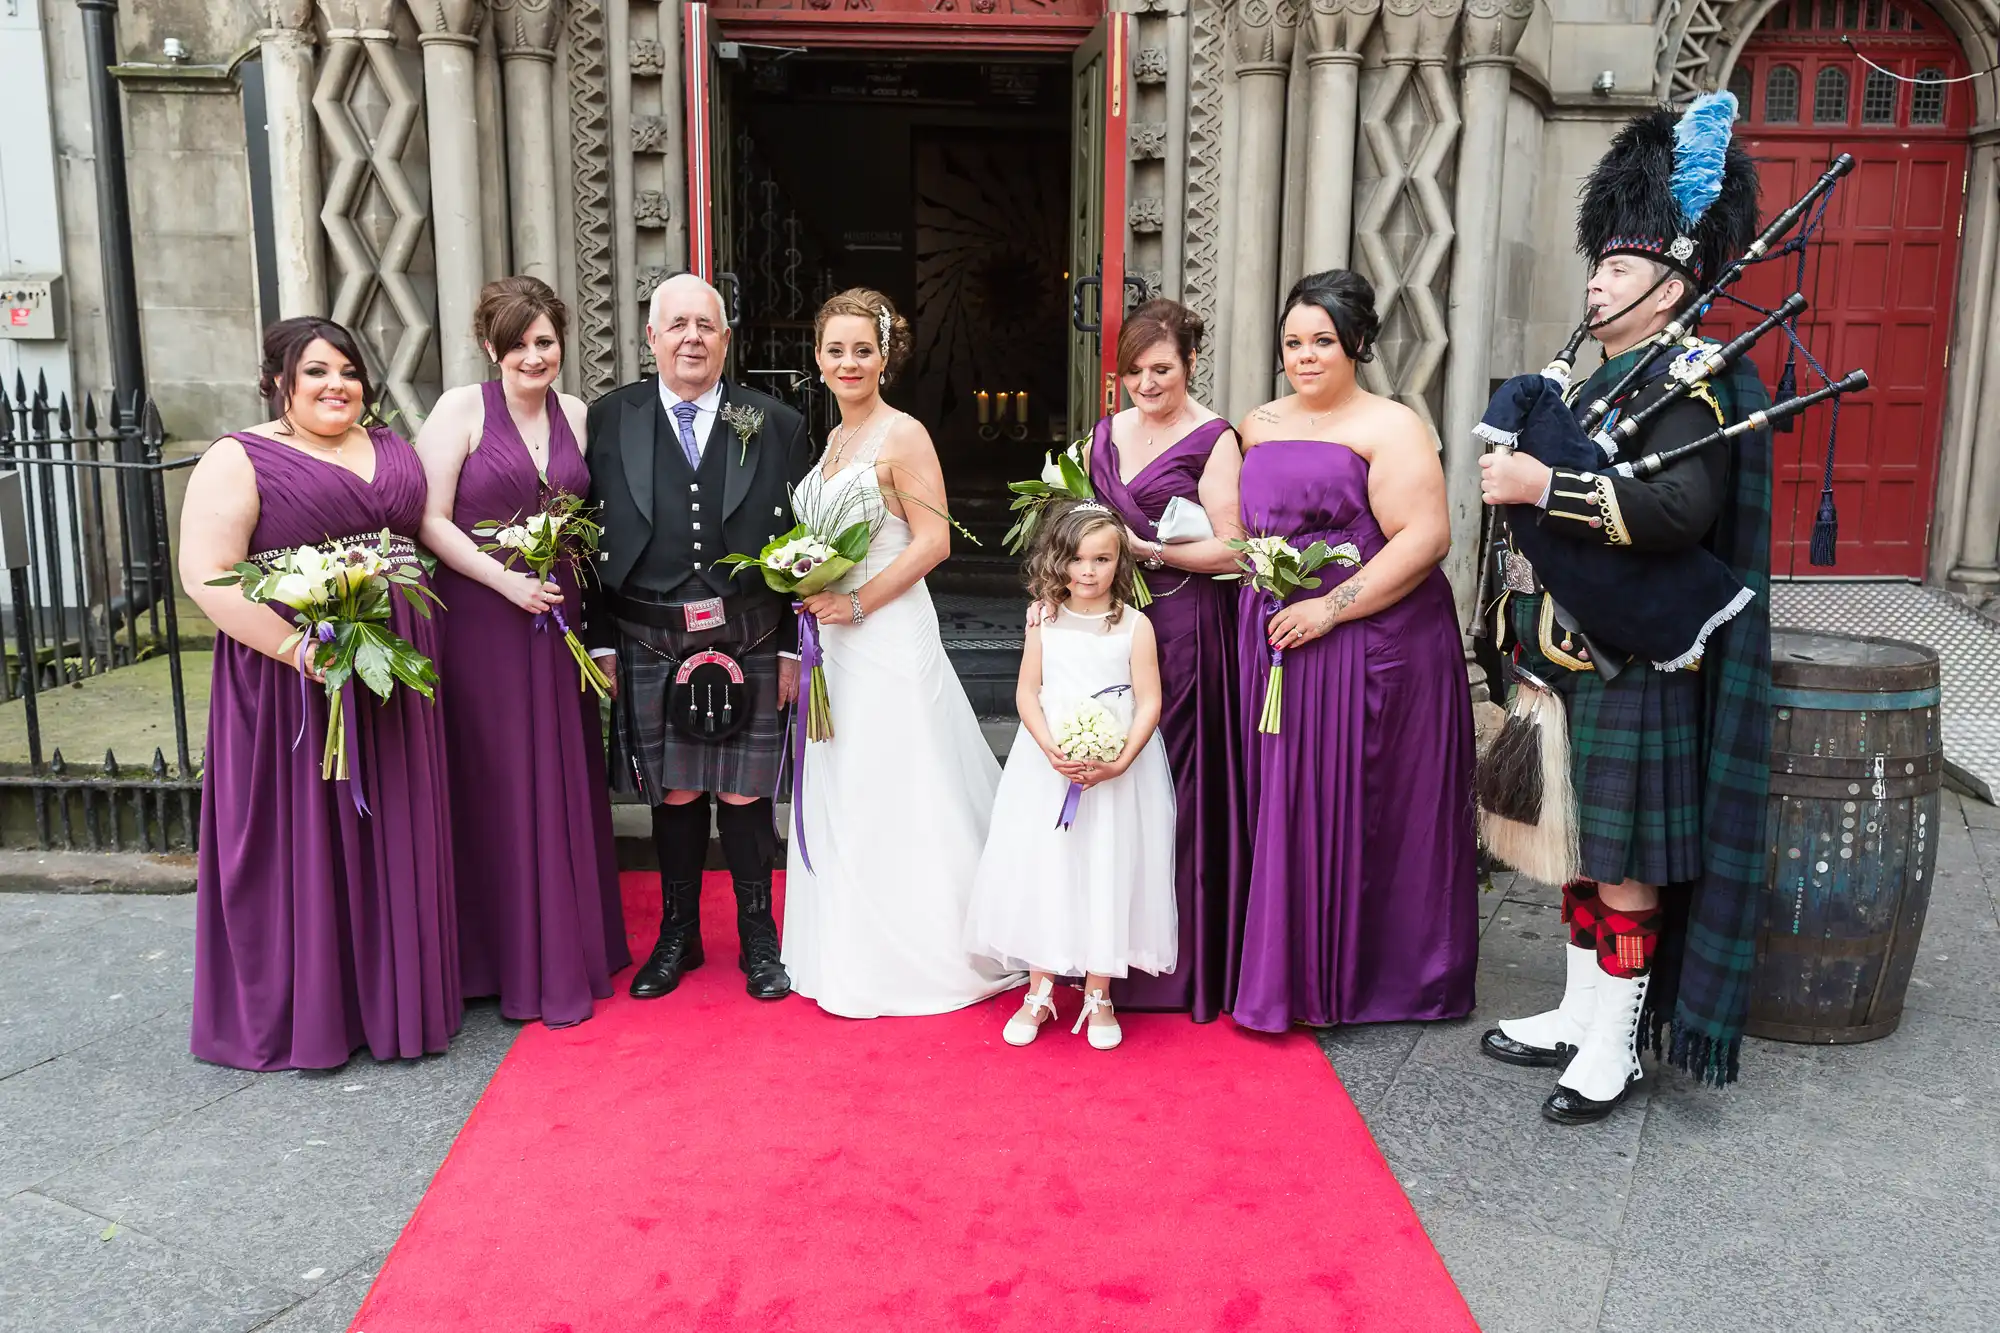 A wedding group posing with a bagpiper outside a church, the women in purple dresses and the men in kilts.